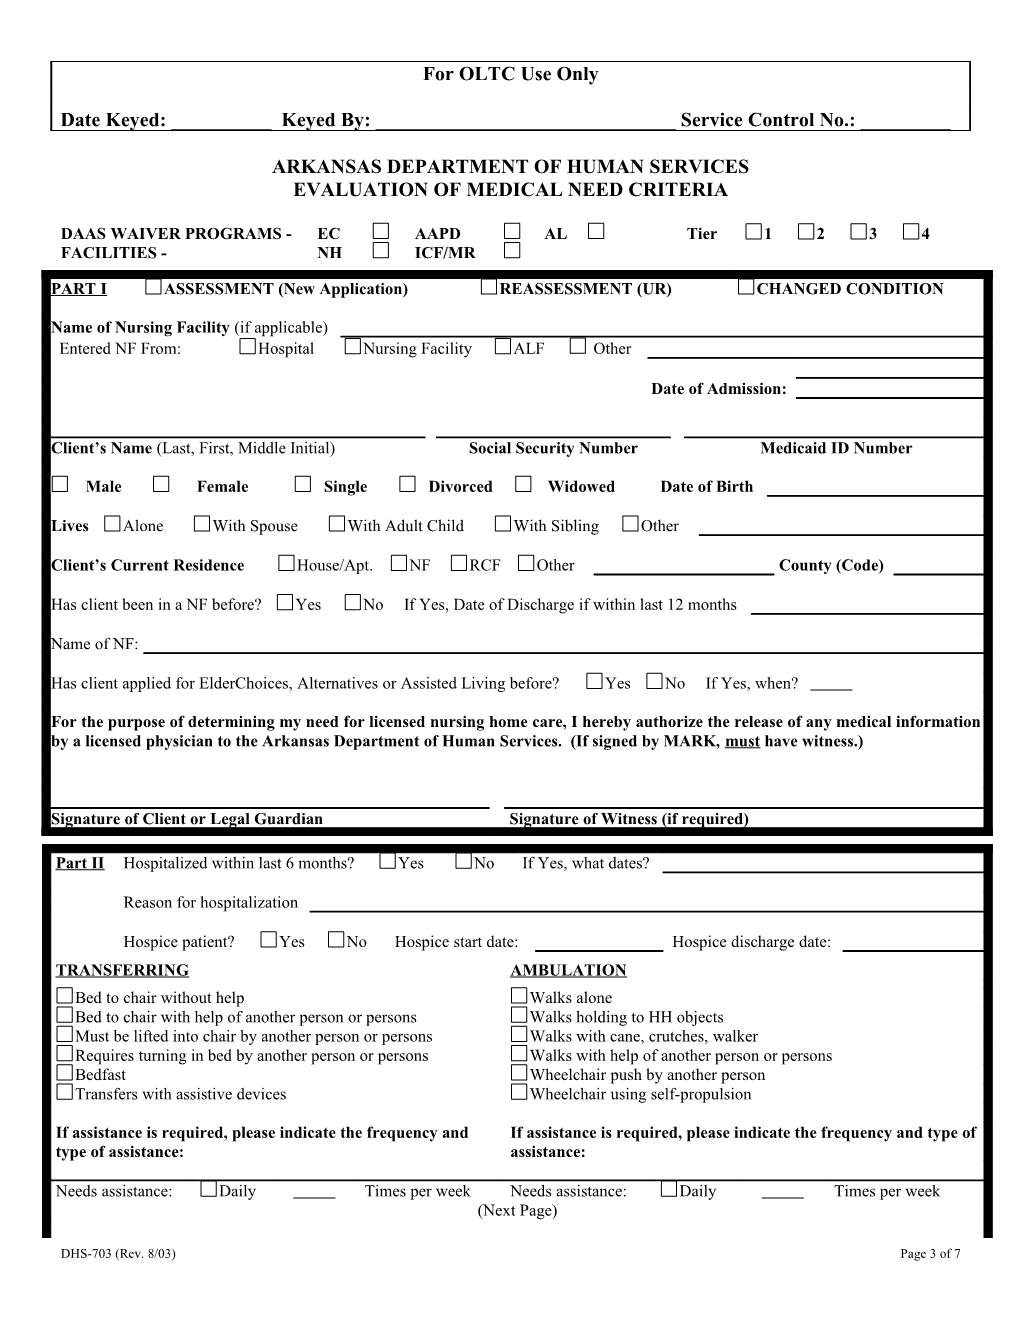 Notice of New DMS-703 Medical Need Determination Form